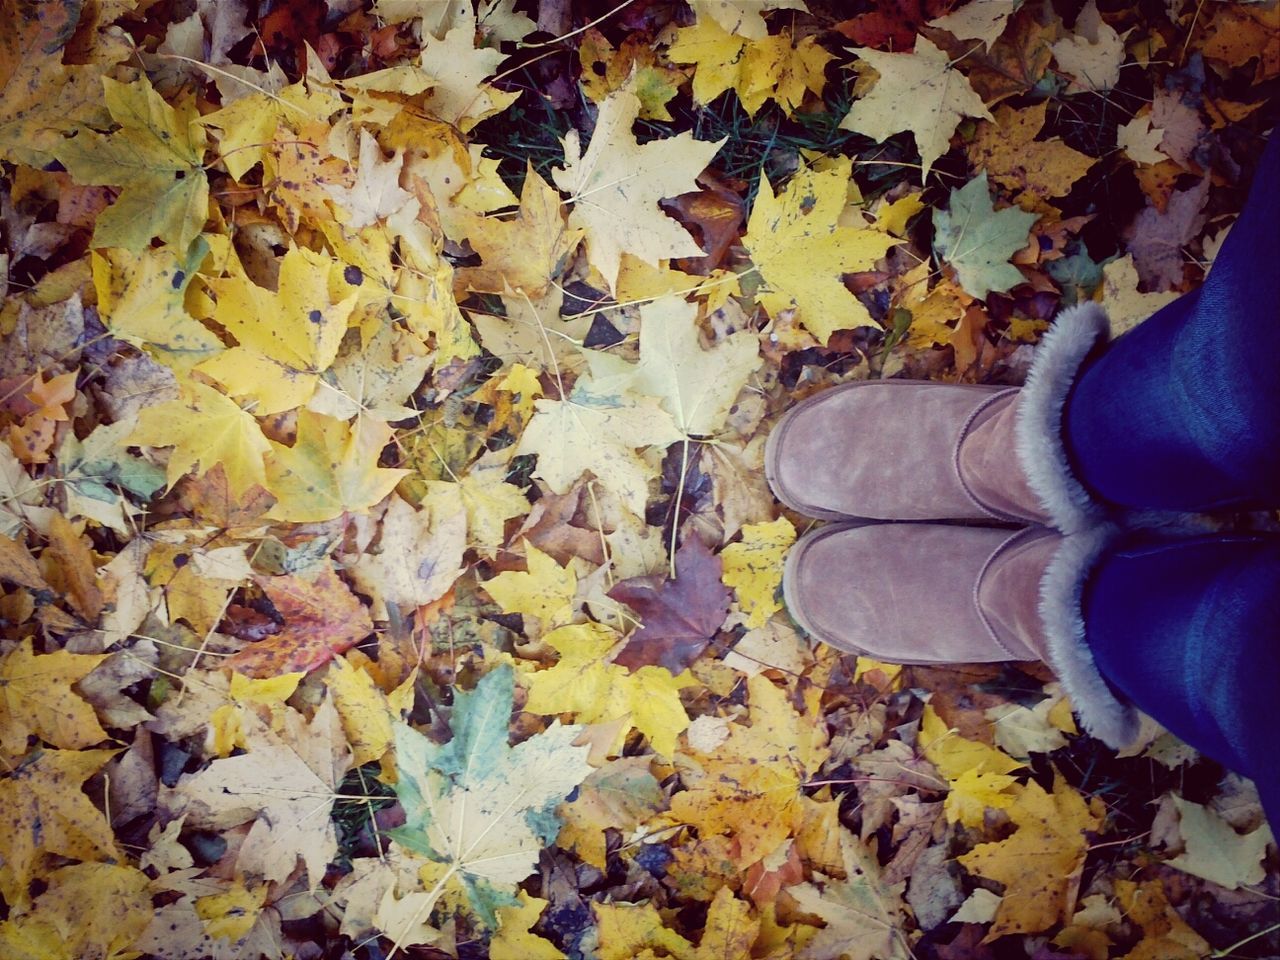 autumn, low section, person, leaf, shoe, change, high angle view, leaves, season, personal perspective, dry, fallen, directly above, abundance, footwear, standing, human foot